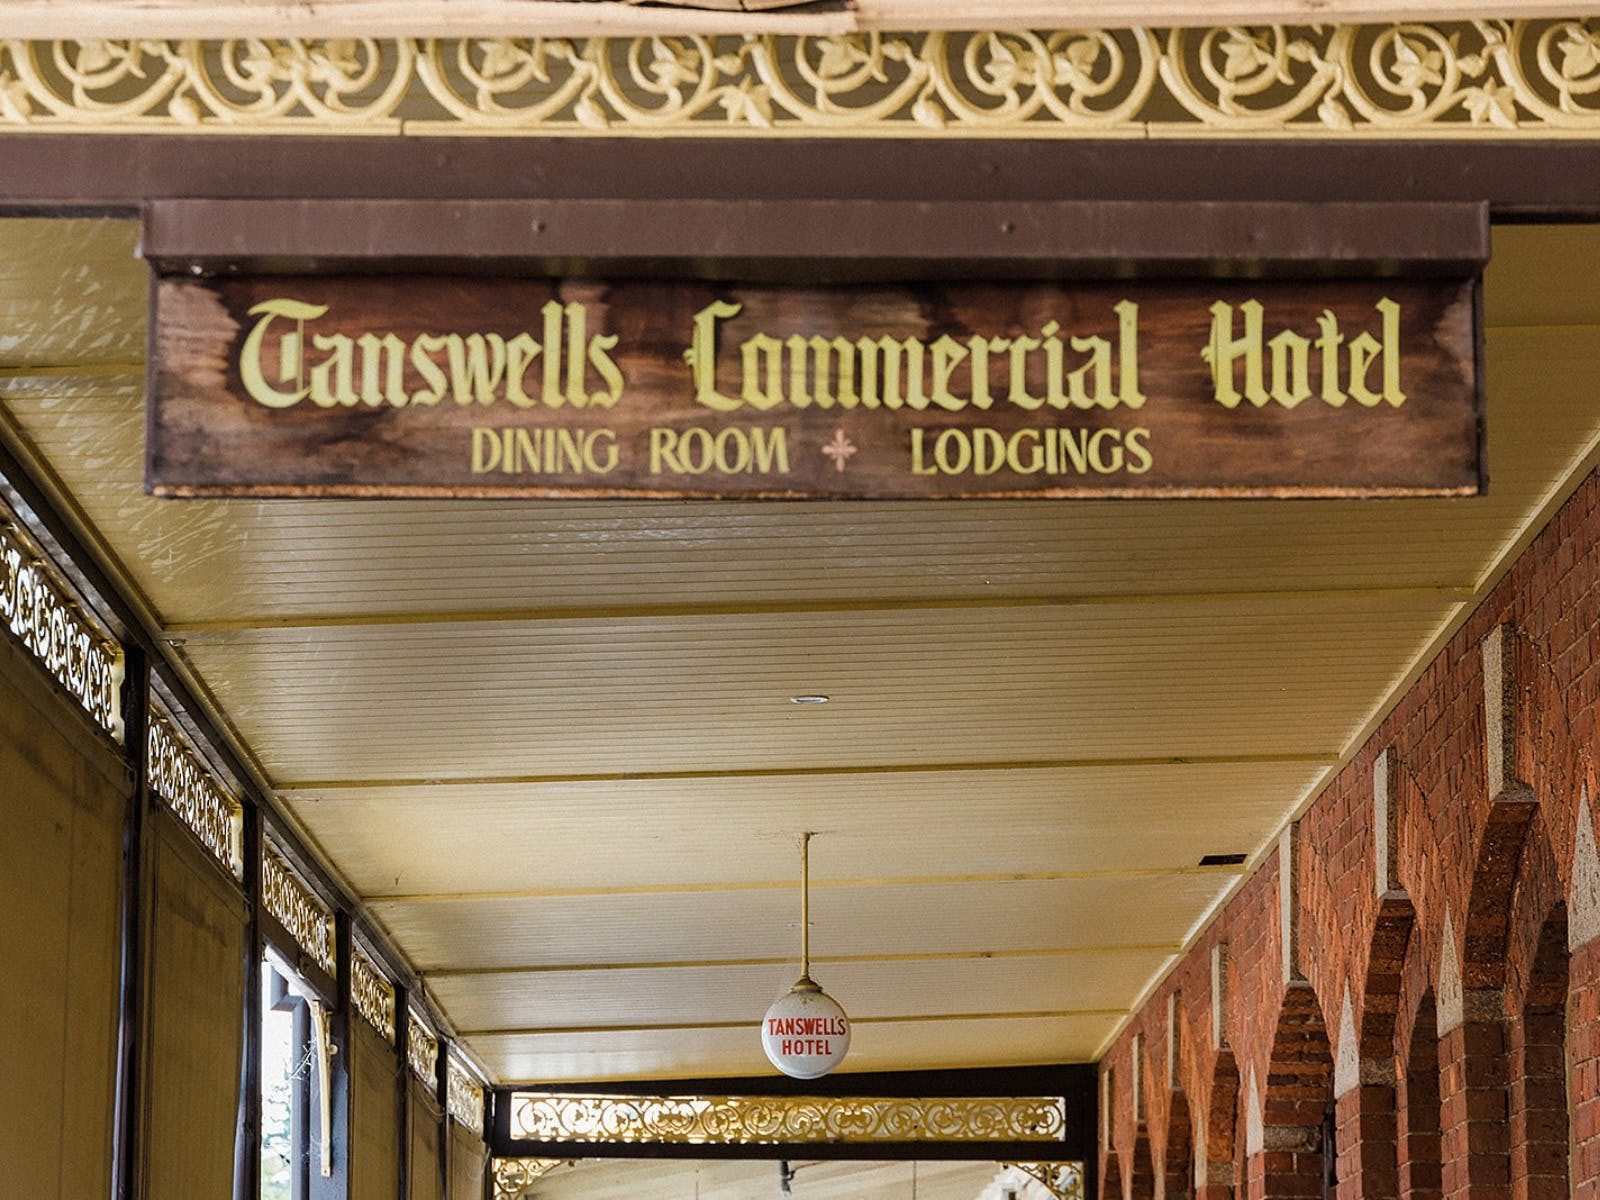 Wooden sign with gold script saying Tanswells Commercial Hotel